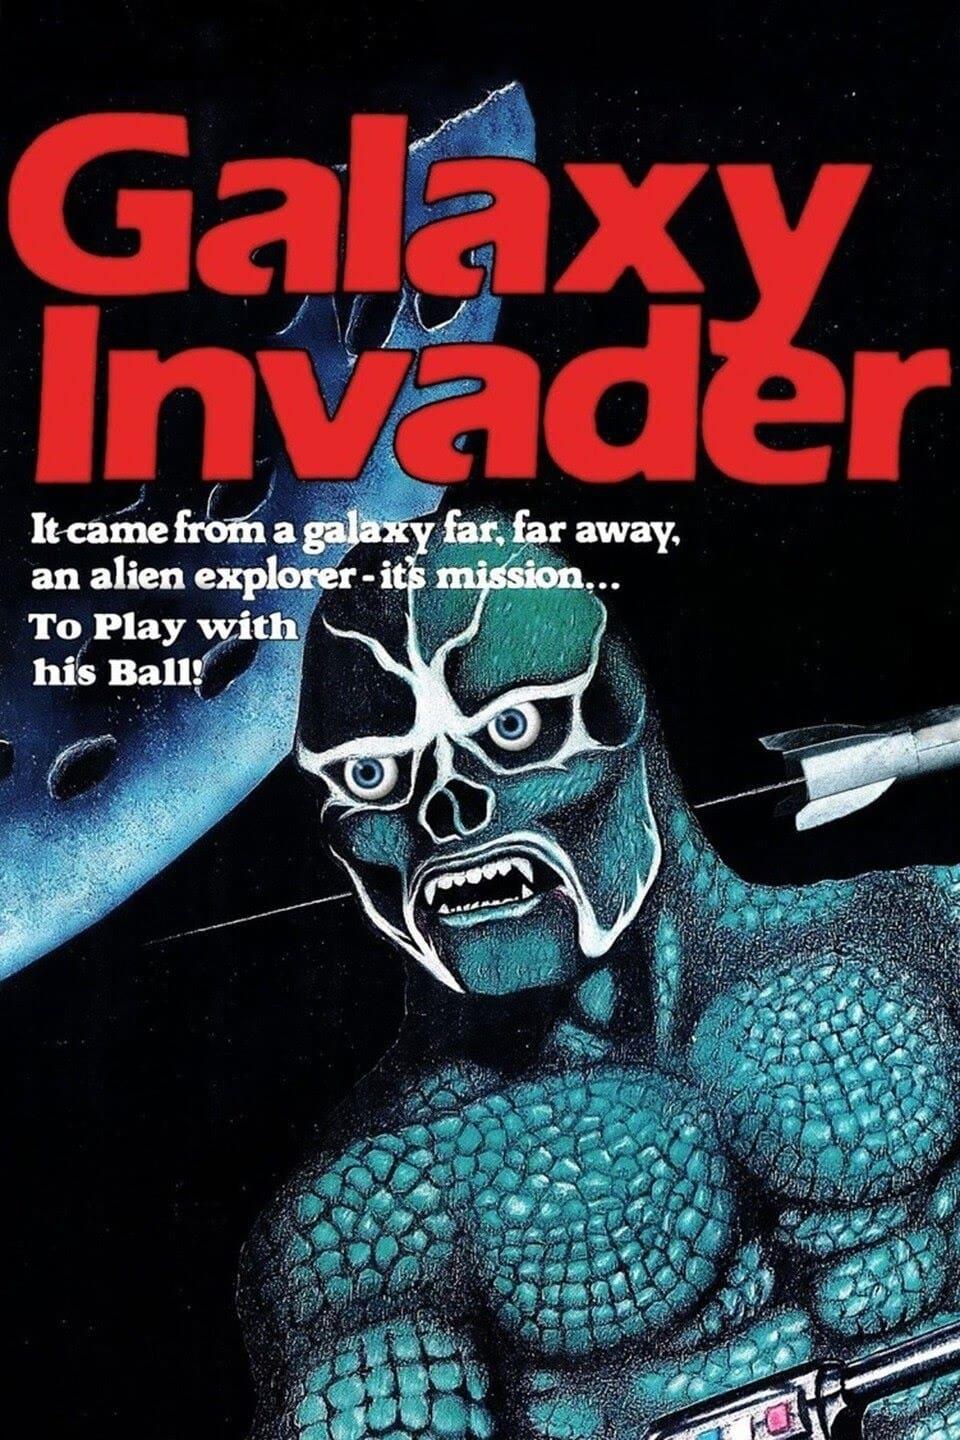 The Galaxy Invader poster